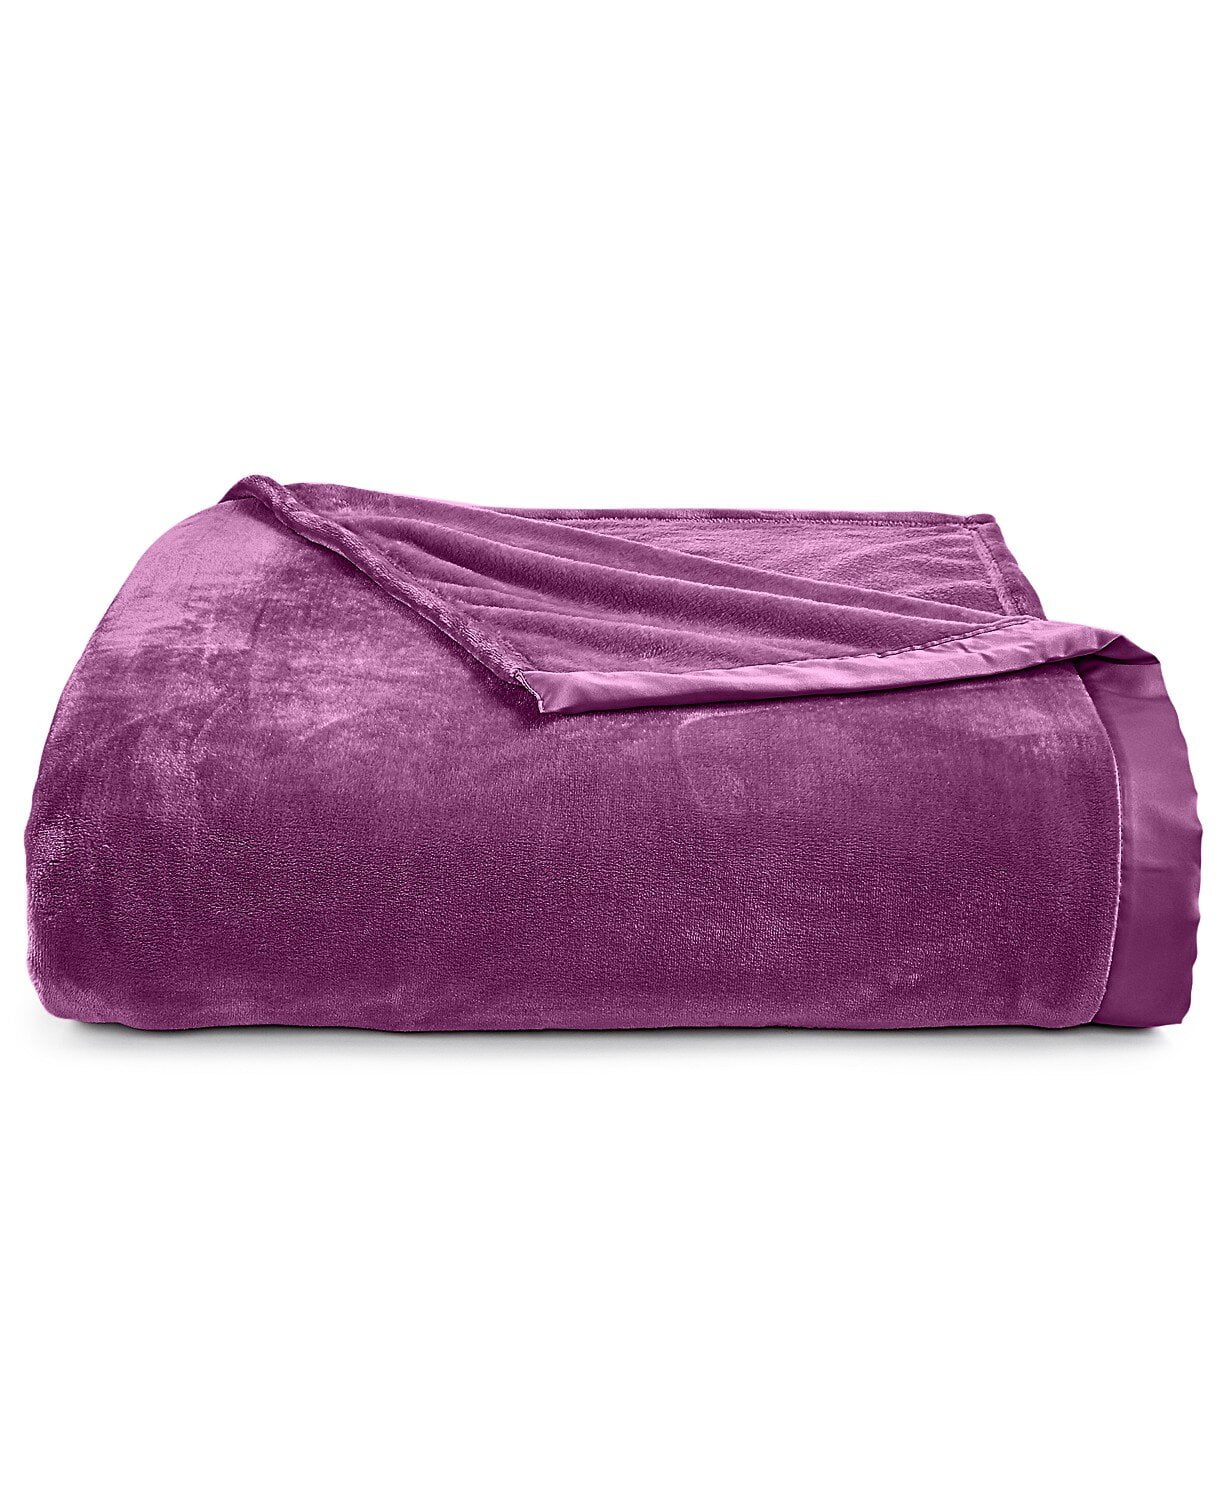 Photo 1 of Berkshire Classic Velvety Plush Twin Size 60 Inches x 90 Inches Polyester Blanket, Eggplant